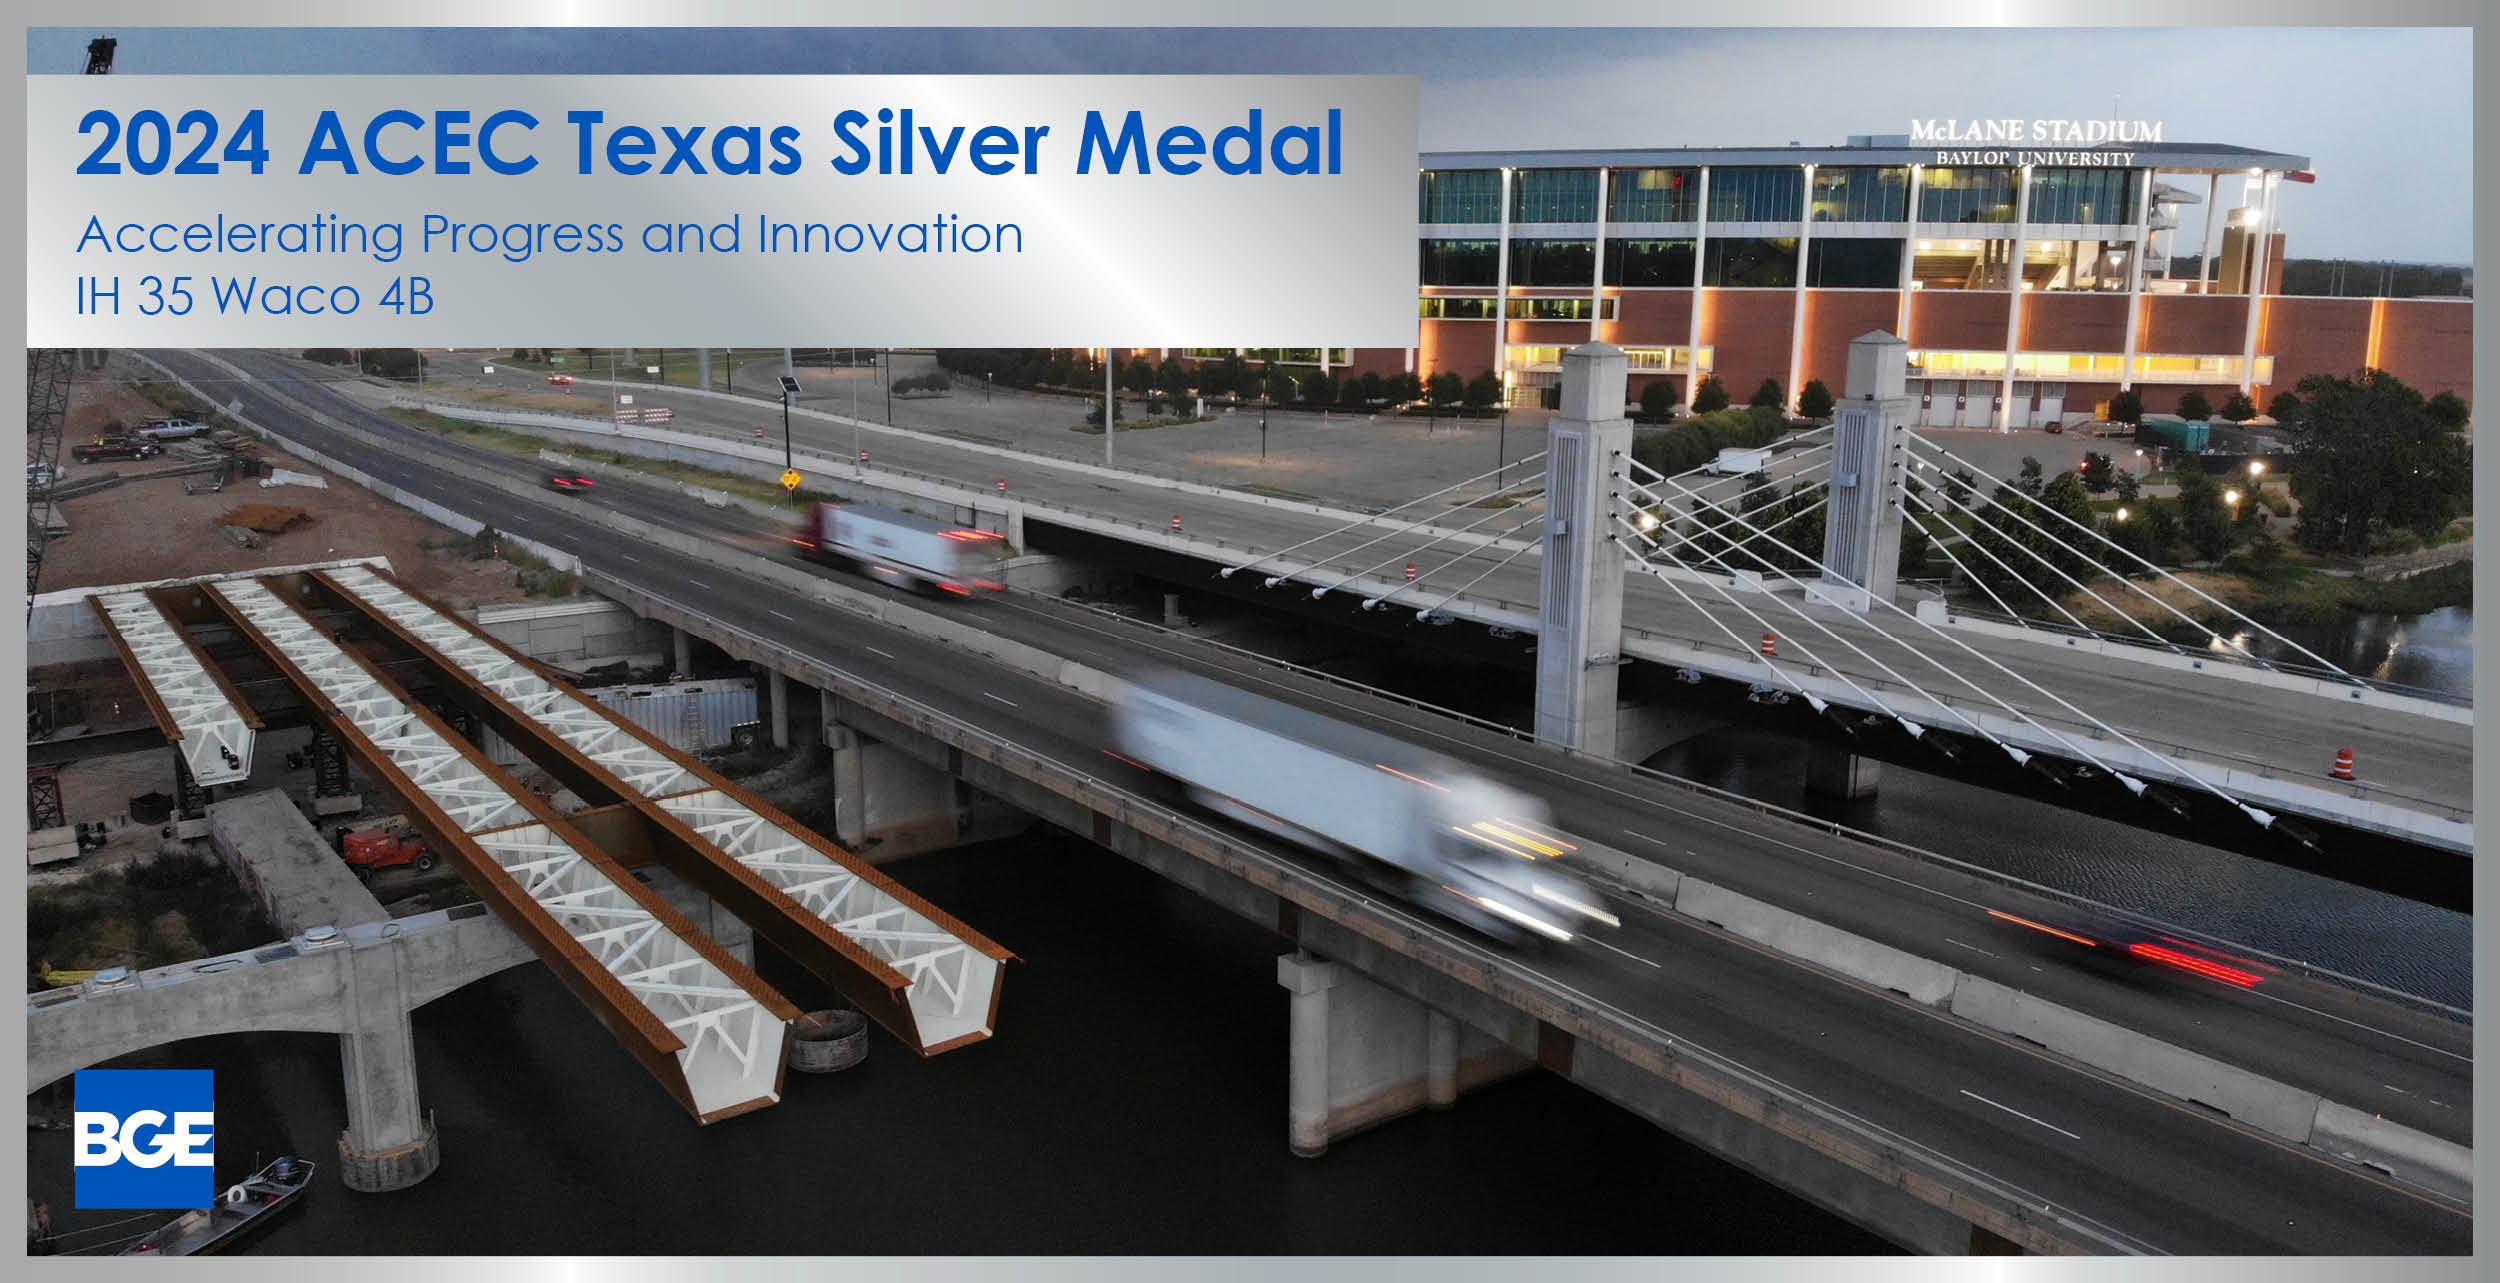 BGE honored with 2024 ACEC Texas Engineering Excellence Silver Medal for IH 35 4B Waco Project